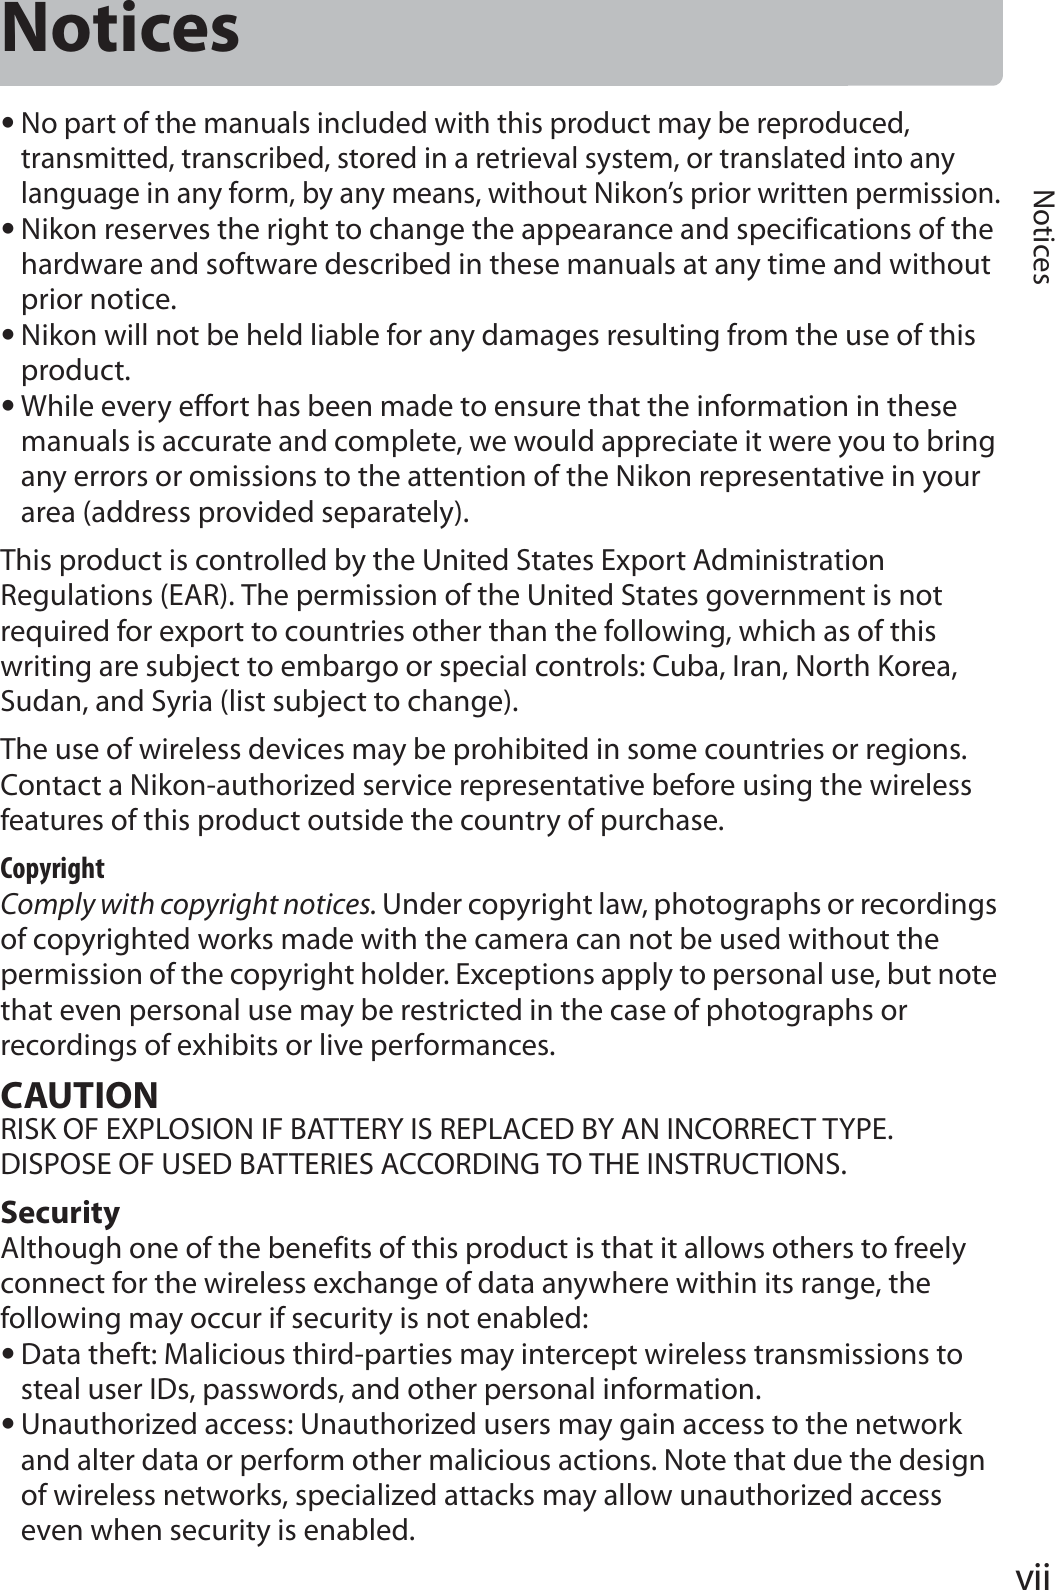 viiNoticesNotices•No part of the manuals included with this product may be reproduced, transmitted, transcribed, stored in a retrieval system, or translated into any language in any form, by any means, without Nikon’s prior written permission.•Nikon reserves the right to change the appearance and specifications of the hardware and software described in these manuals at any time and without prior notice.•Nikon will not be held liable for any damages resulting from the use of this product.•While every effort has been made to ensure that the information in these manuals is accurate and complete, we would appreciate it were you to bring any errors or omissions to the attention of the Nikon representative in your area (address provided separately).This product is controlled by the United States Export Administration Regulations (EAR). The permission of the United States government is not required for export to countries other than the following, which as of this writing are subject to embargo or special controls: Cuba, Iran, North Korea, Sudan, and Syria (list subject to change).The use of wireless devices may be prohibited in some countries or regions. Contact a Nikon-authorized service representative before using the wireless features of this product outside the country of purchase.CopyrightComply with copyright notices. Under copyright law, photographs or recordings of copyrighted works made with the camera can not be used without the permission of the copyright holder. Exceptions apply to personal use, but note that even personal use may be restricted in the case of photographs or recordings of exhibits or live performances.CAUTIONRISK OF EXPLOSION IF BATTERY IS REPLACED BY AN INCORRECT TYPE.DISPOSE OF USED BATTERIES ACCORDING TO THE INSTRUCTIONS.SecurityAlthough one of the benefits of this product is that it allows others to freely connect for the wireless exchange of data anywhere within its range, the following may occur if security is not enabled:•Data theft: Malicious third-parties may intercept wireless transmissions to steal user IDs, passwords, and other personal information.•Unauthorized access: Unauthorized users may gain access to the network and alter data or perform other malicious actions. Note that due the design of wireless networks, specialized attacks may allow unauthorized access even when security is enabled.